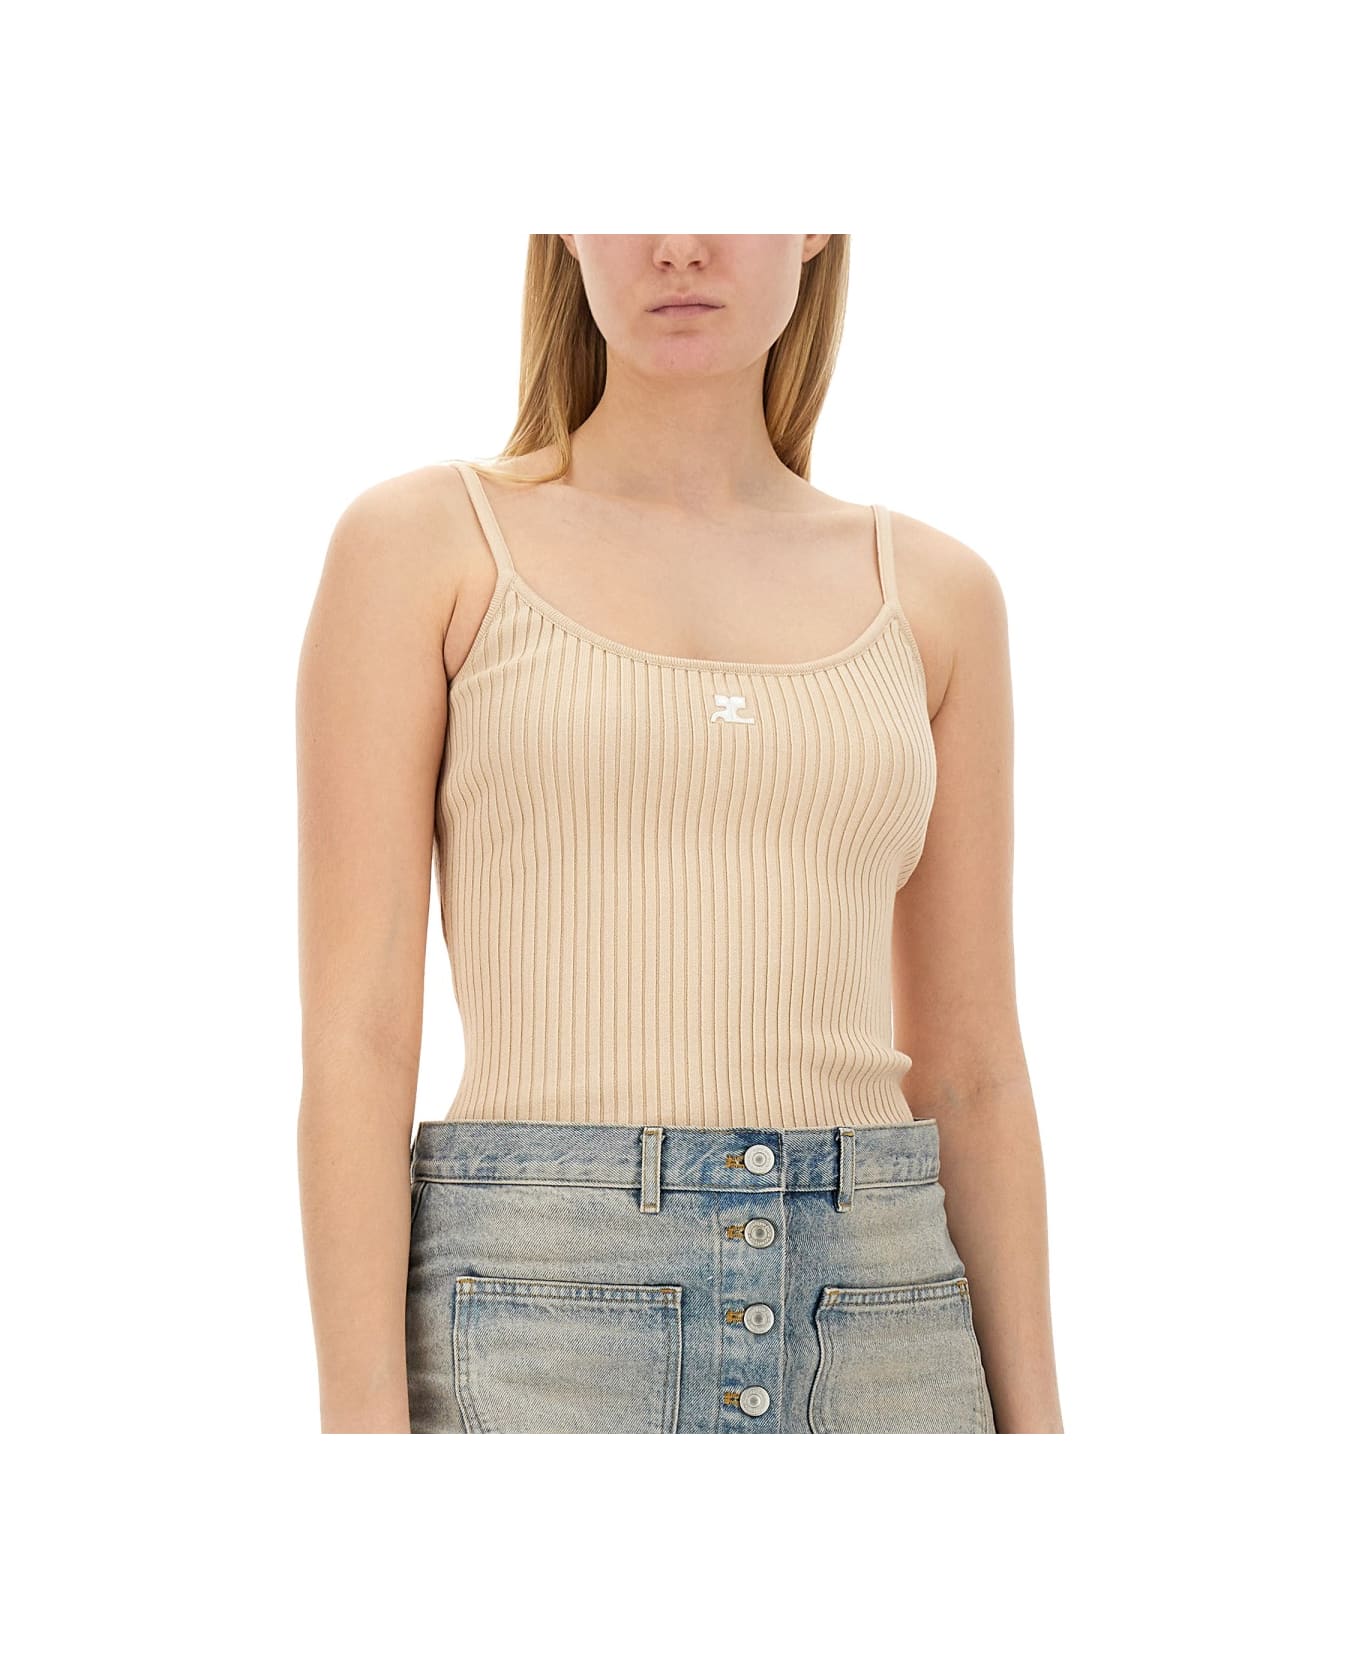 Courrèges Knitted Tops. - BEIGE